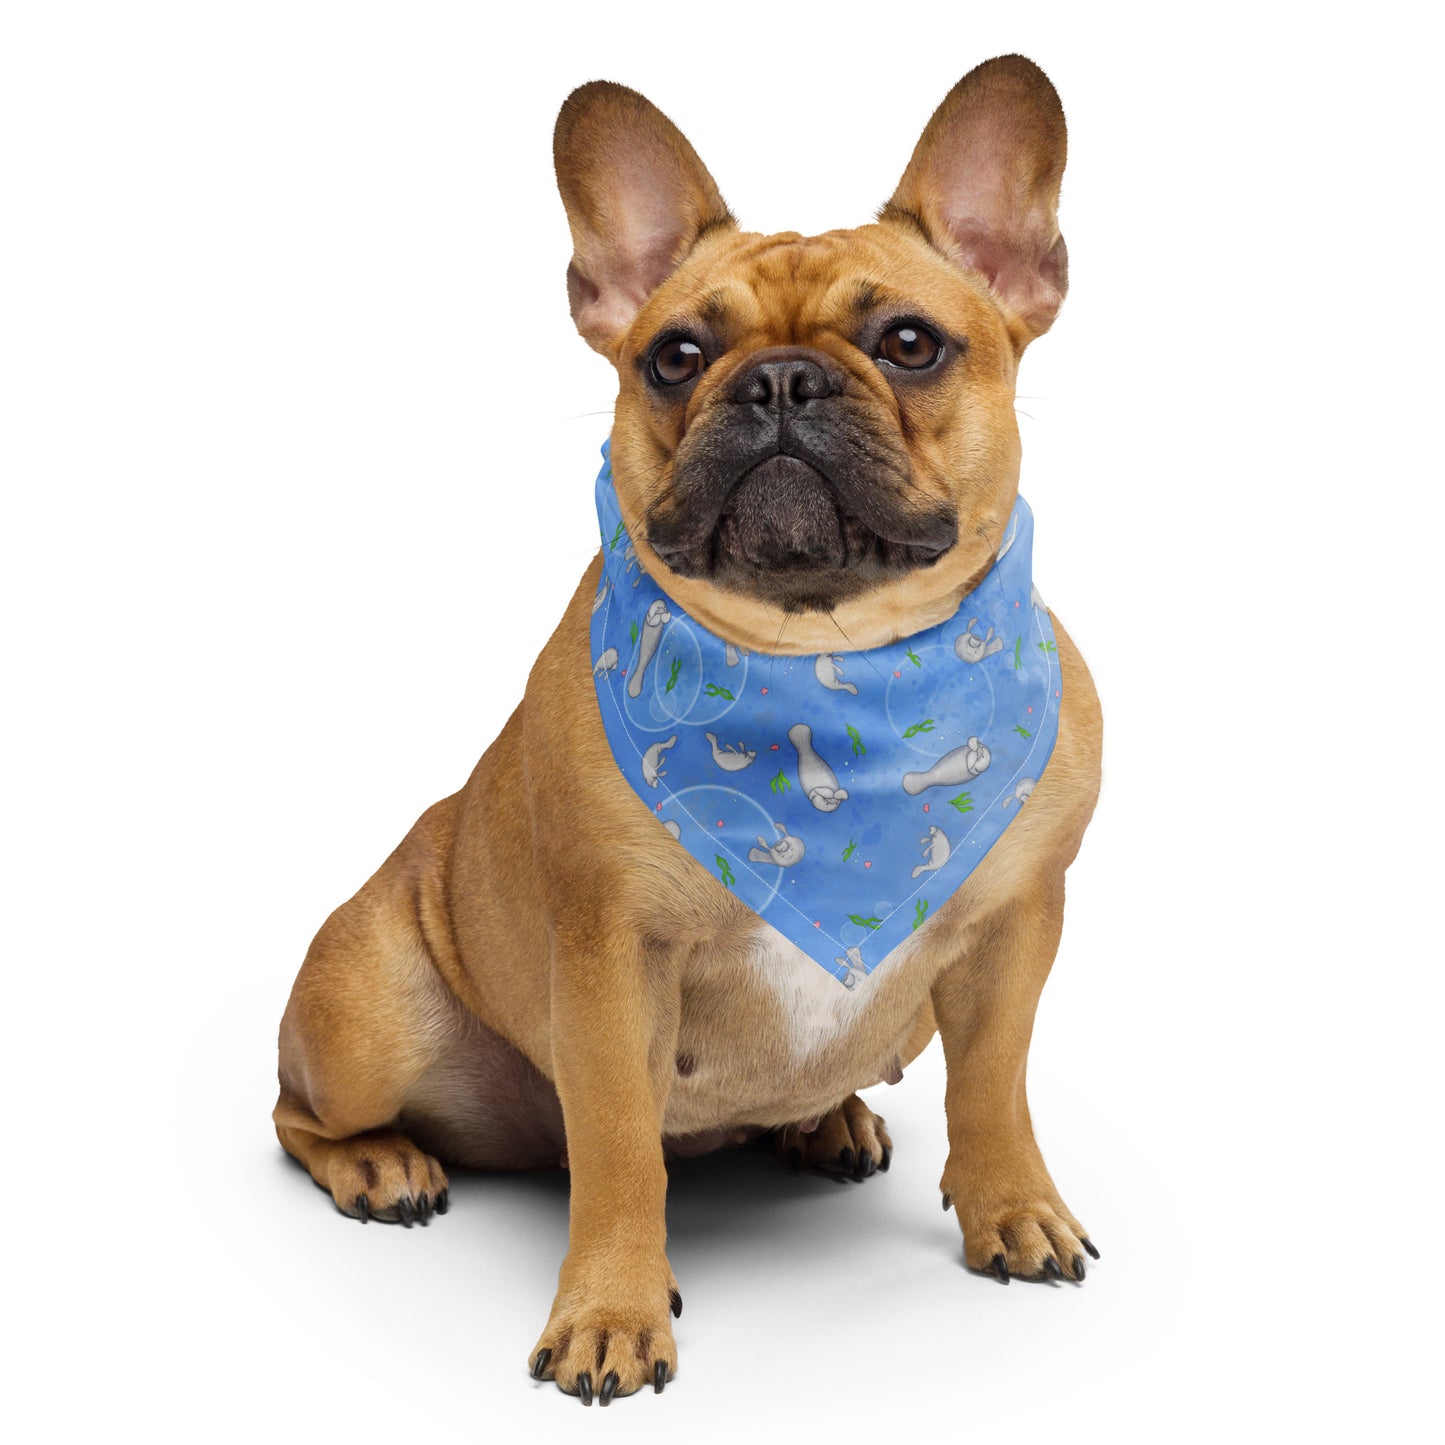 Manatee bandana. Small size shown as a neck bandana on a dog. Features patterned design of hand-illustrated manatees, seaweed, seashells, and bubbles on a blue  background.